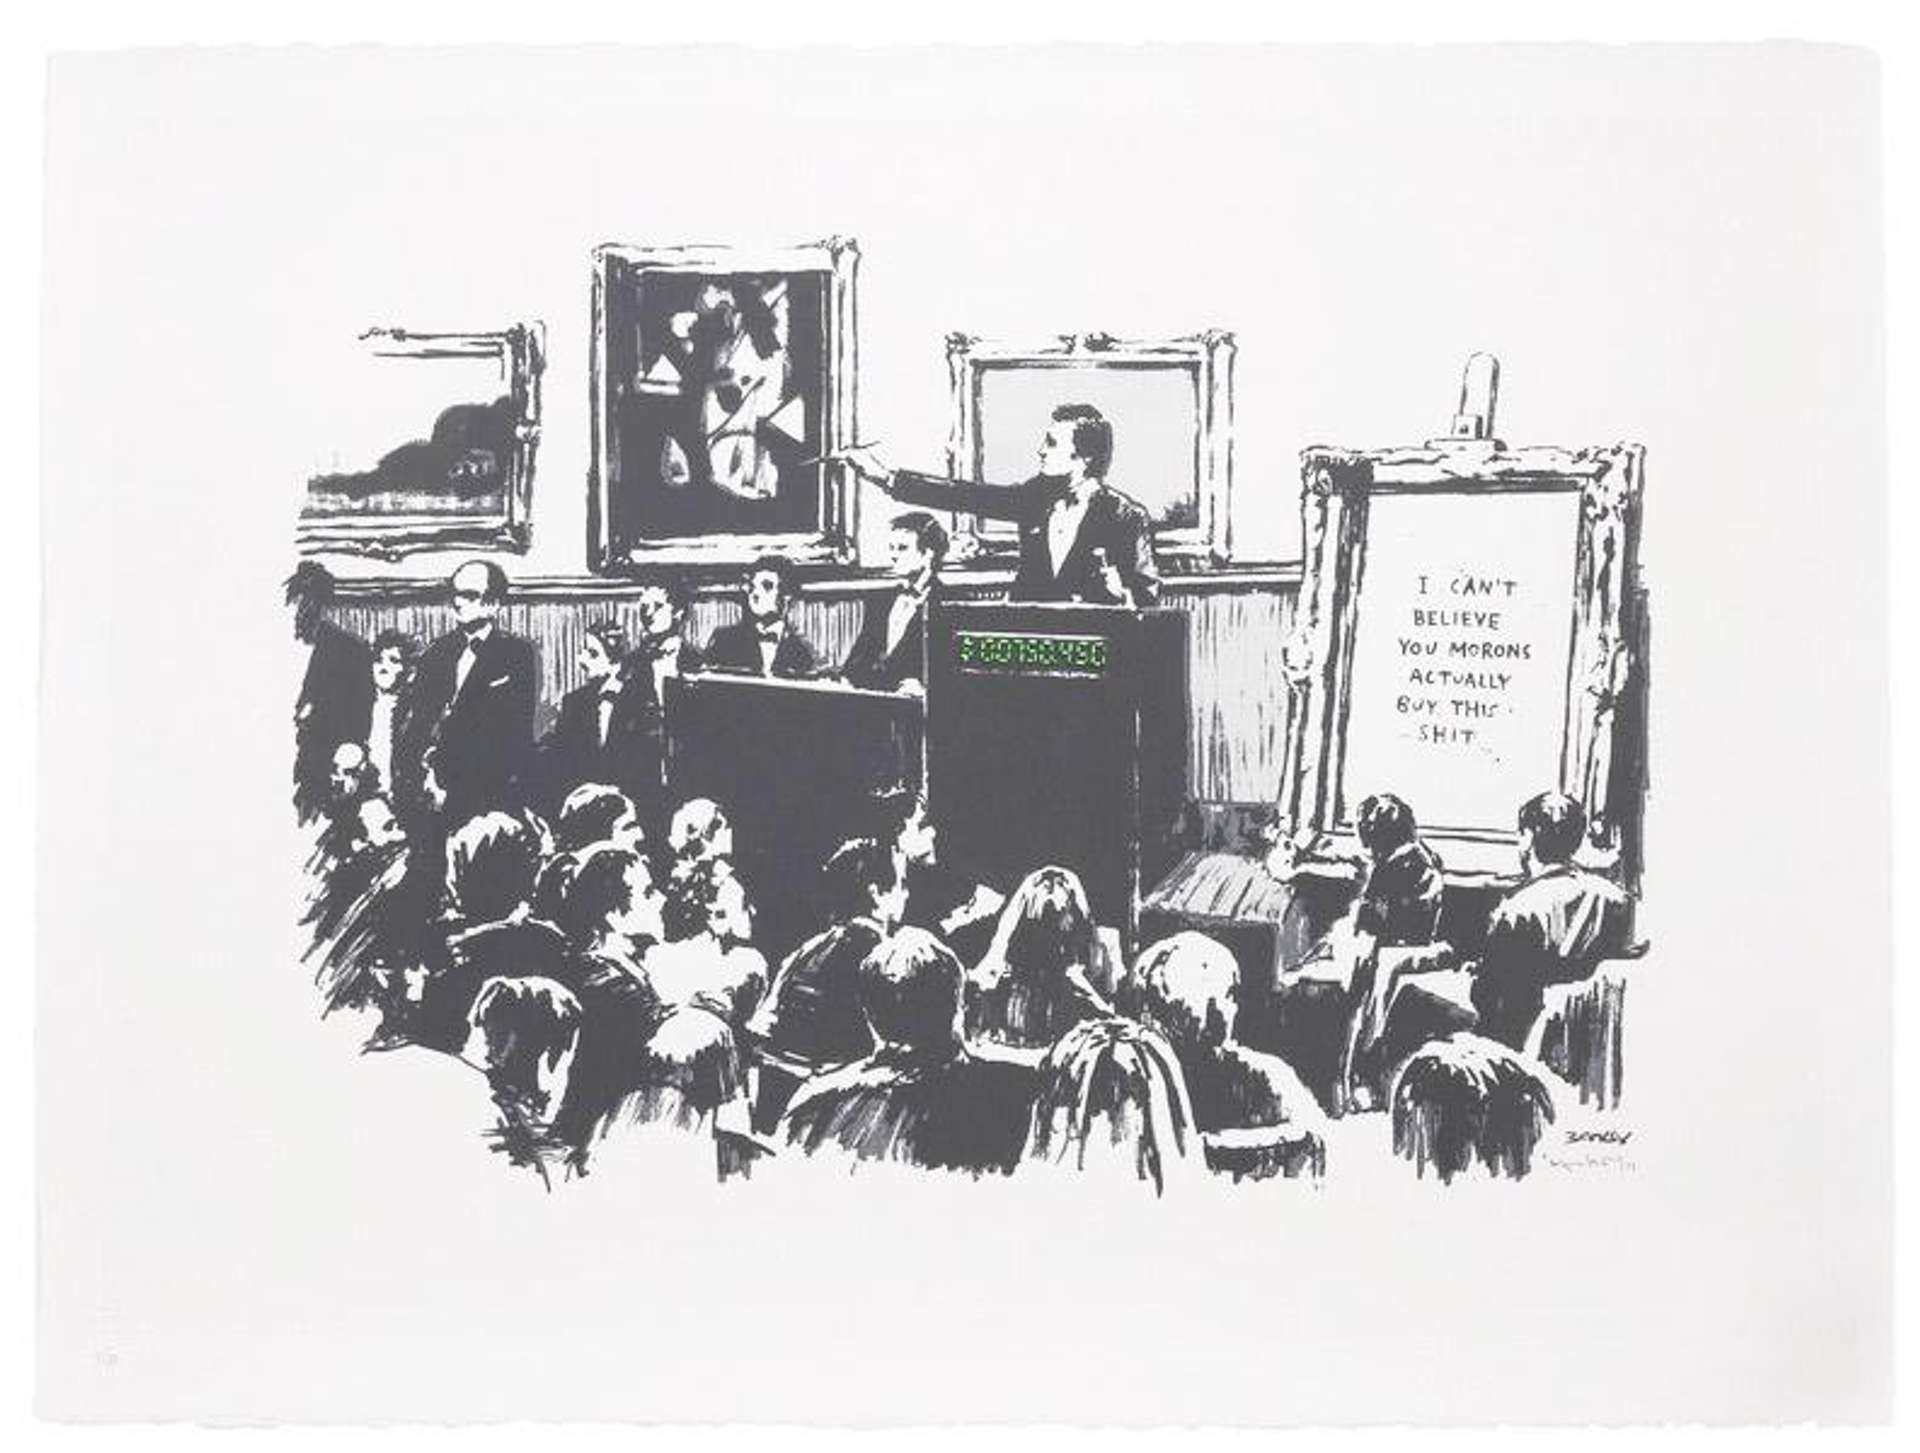 A Banksy screenprint depicting a crowd of people in an auction setting. An auctioneer is seen at the podium, selling an artwork with a banner that reads, "I can't believe you morons actually buy this shit."